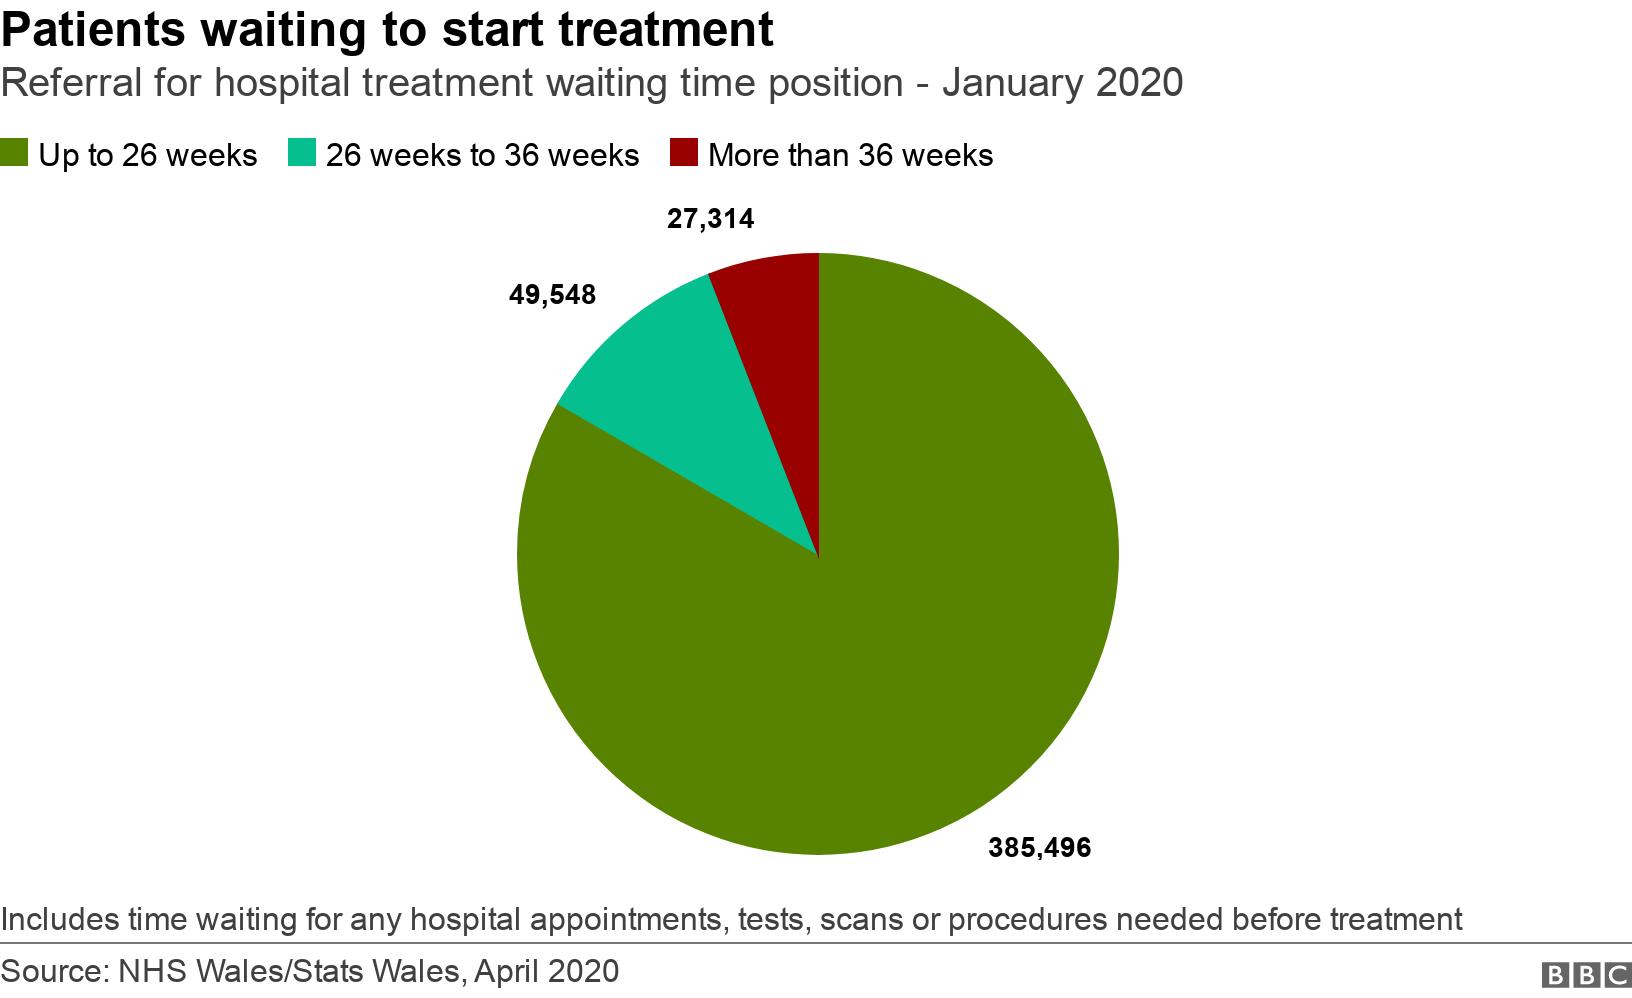 Patients waiting to start treatment. Referral for hospital treatment waiting time position - January 2020. Includes time waiting for any hospital appointments, tests, scans or procedures needed before treatment.